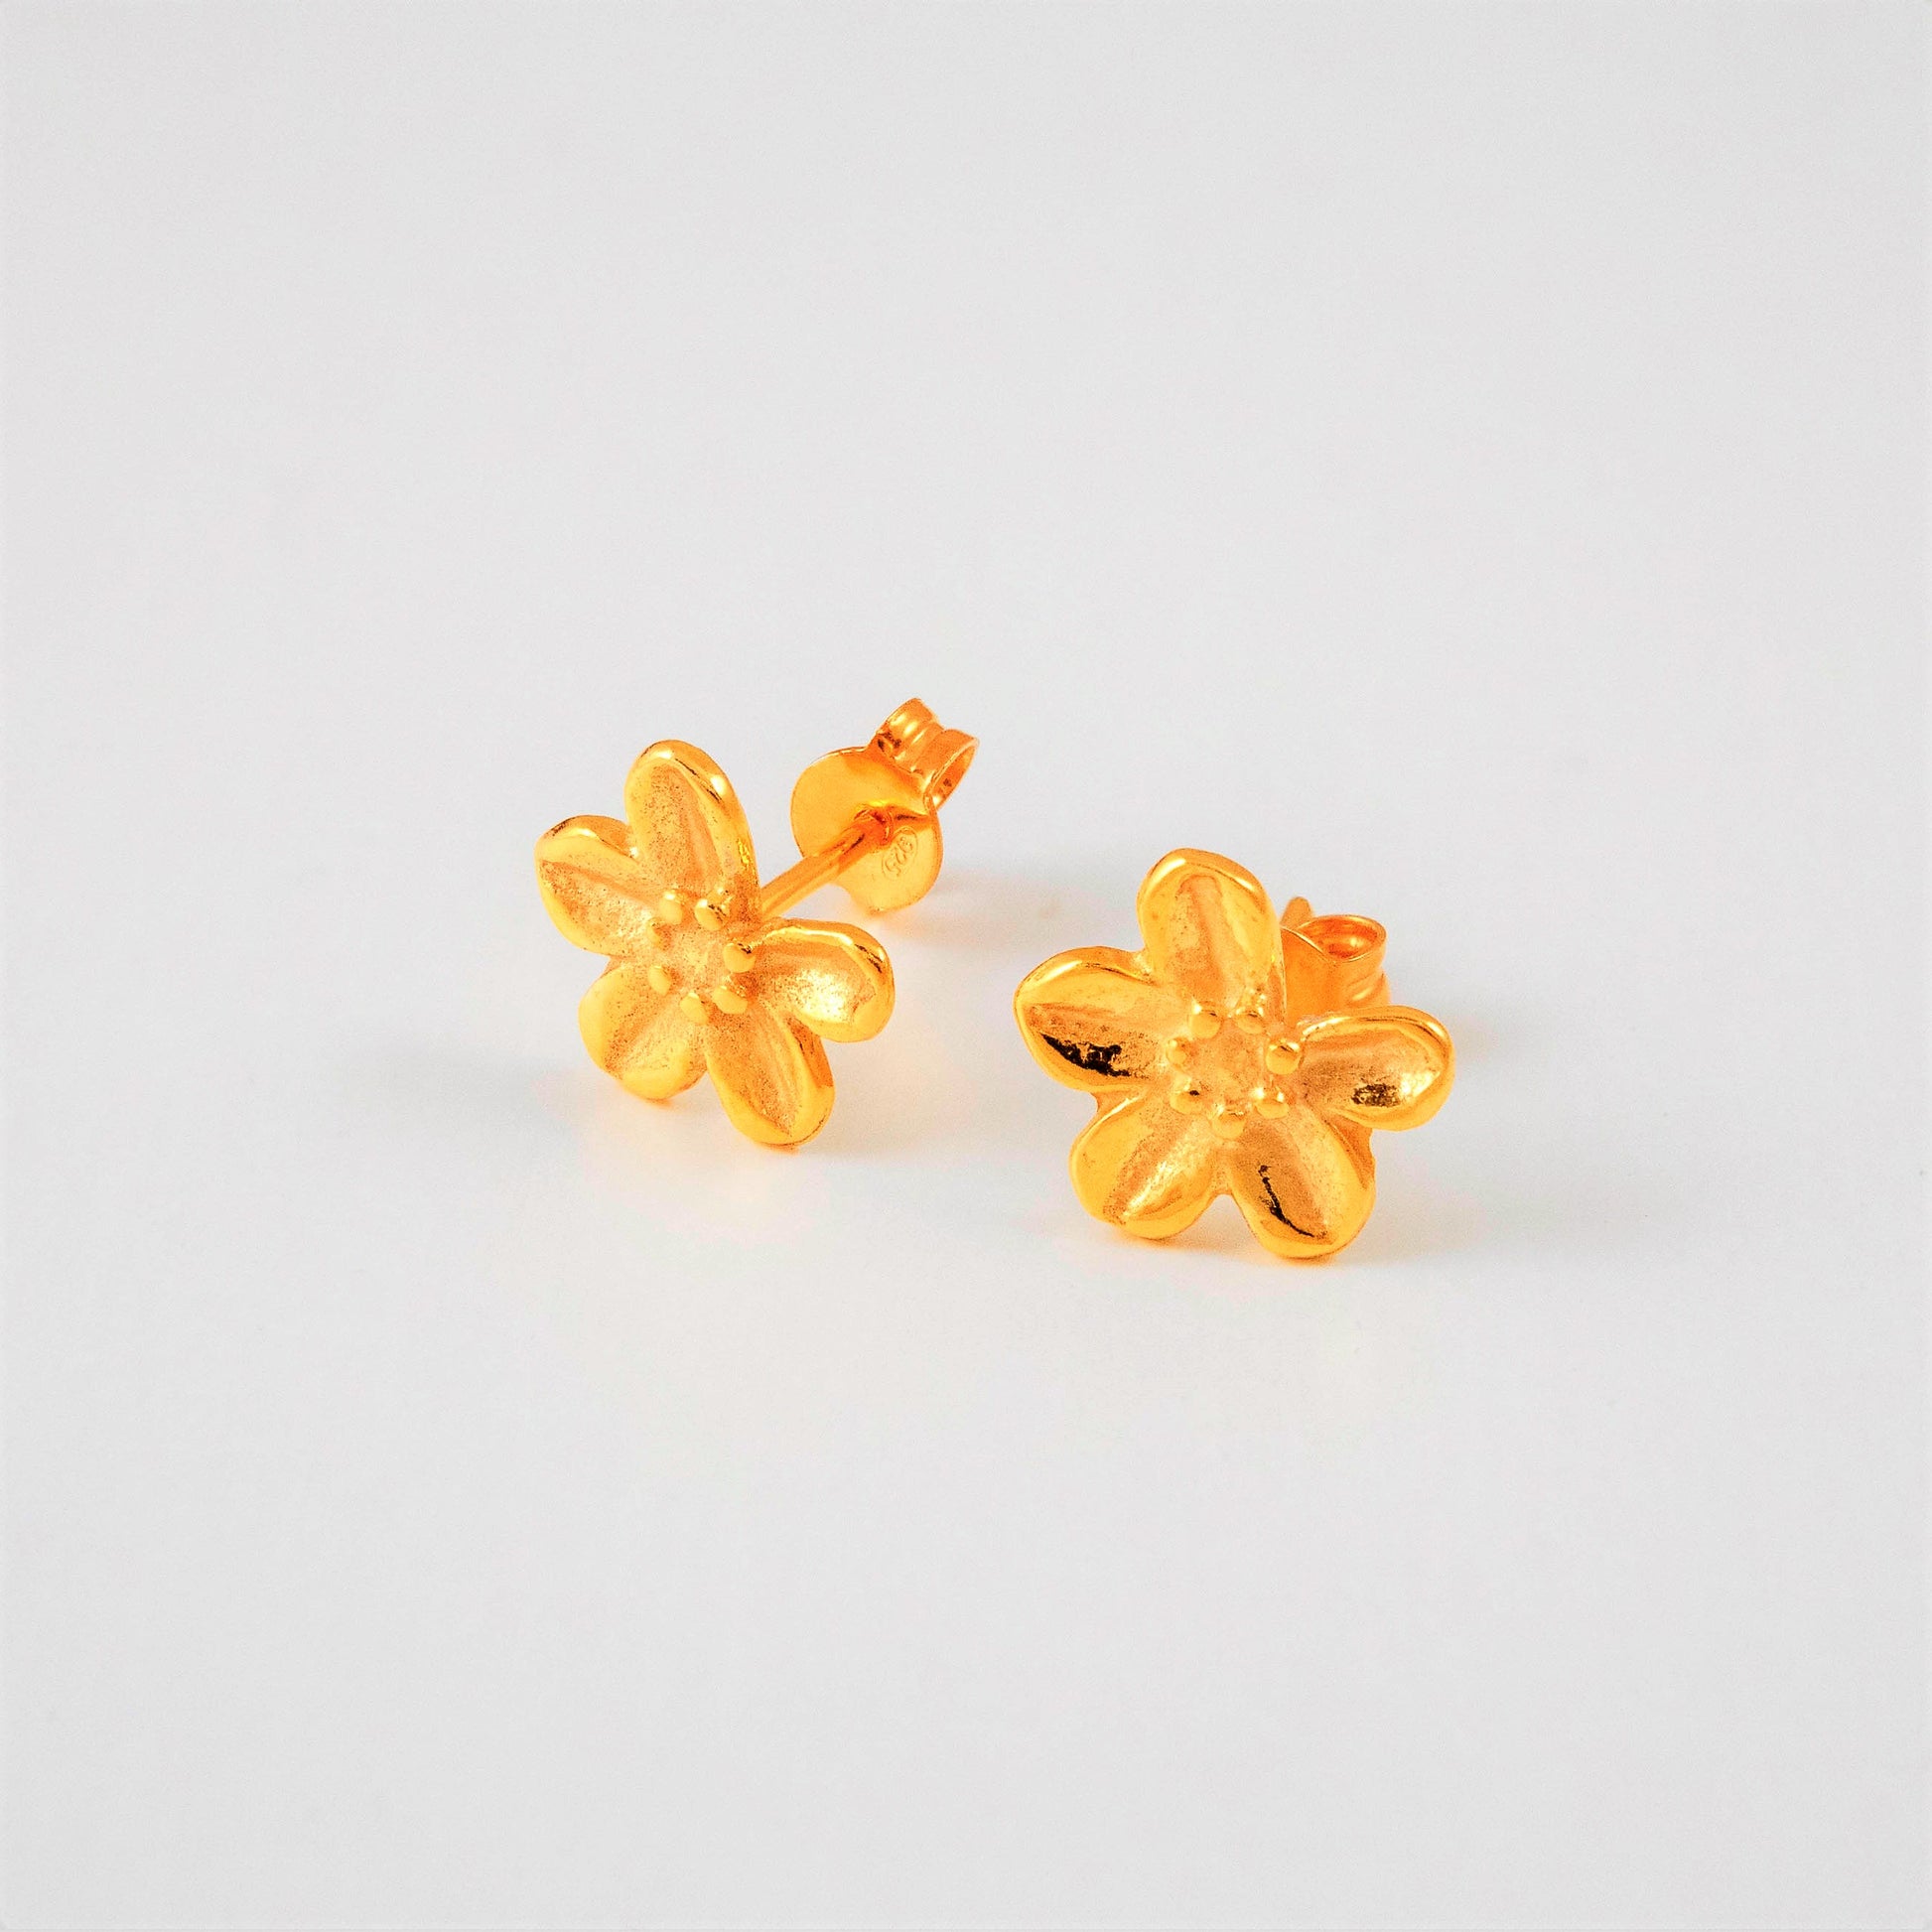 Tiny Daisy gold plated stud earrings with daisies